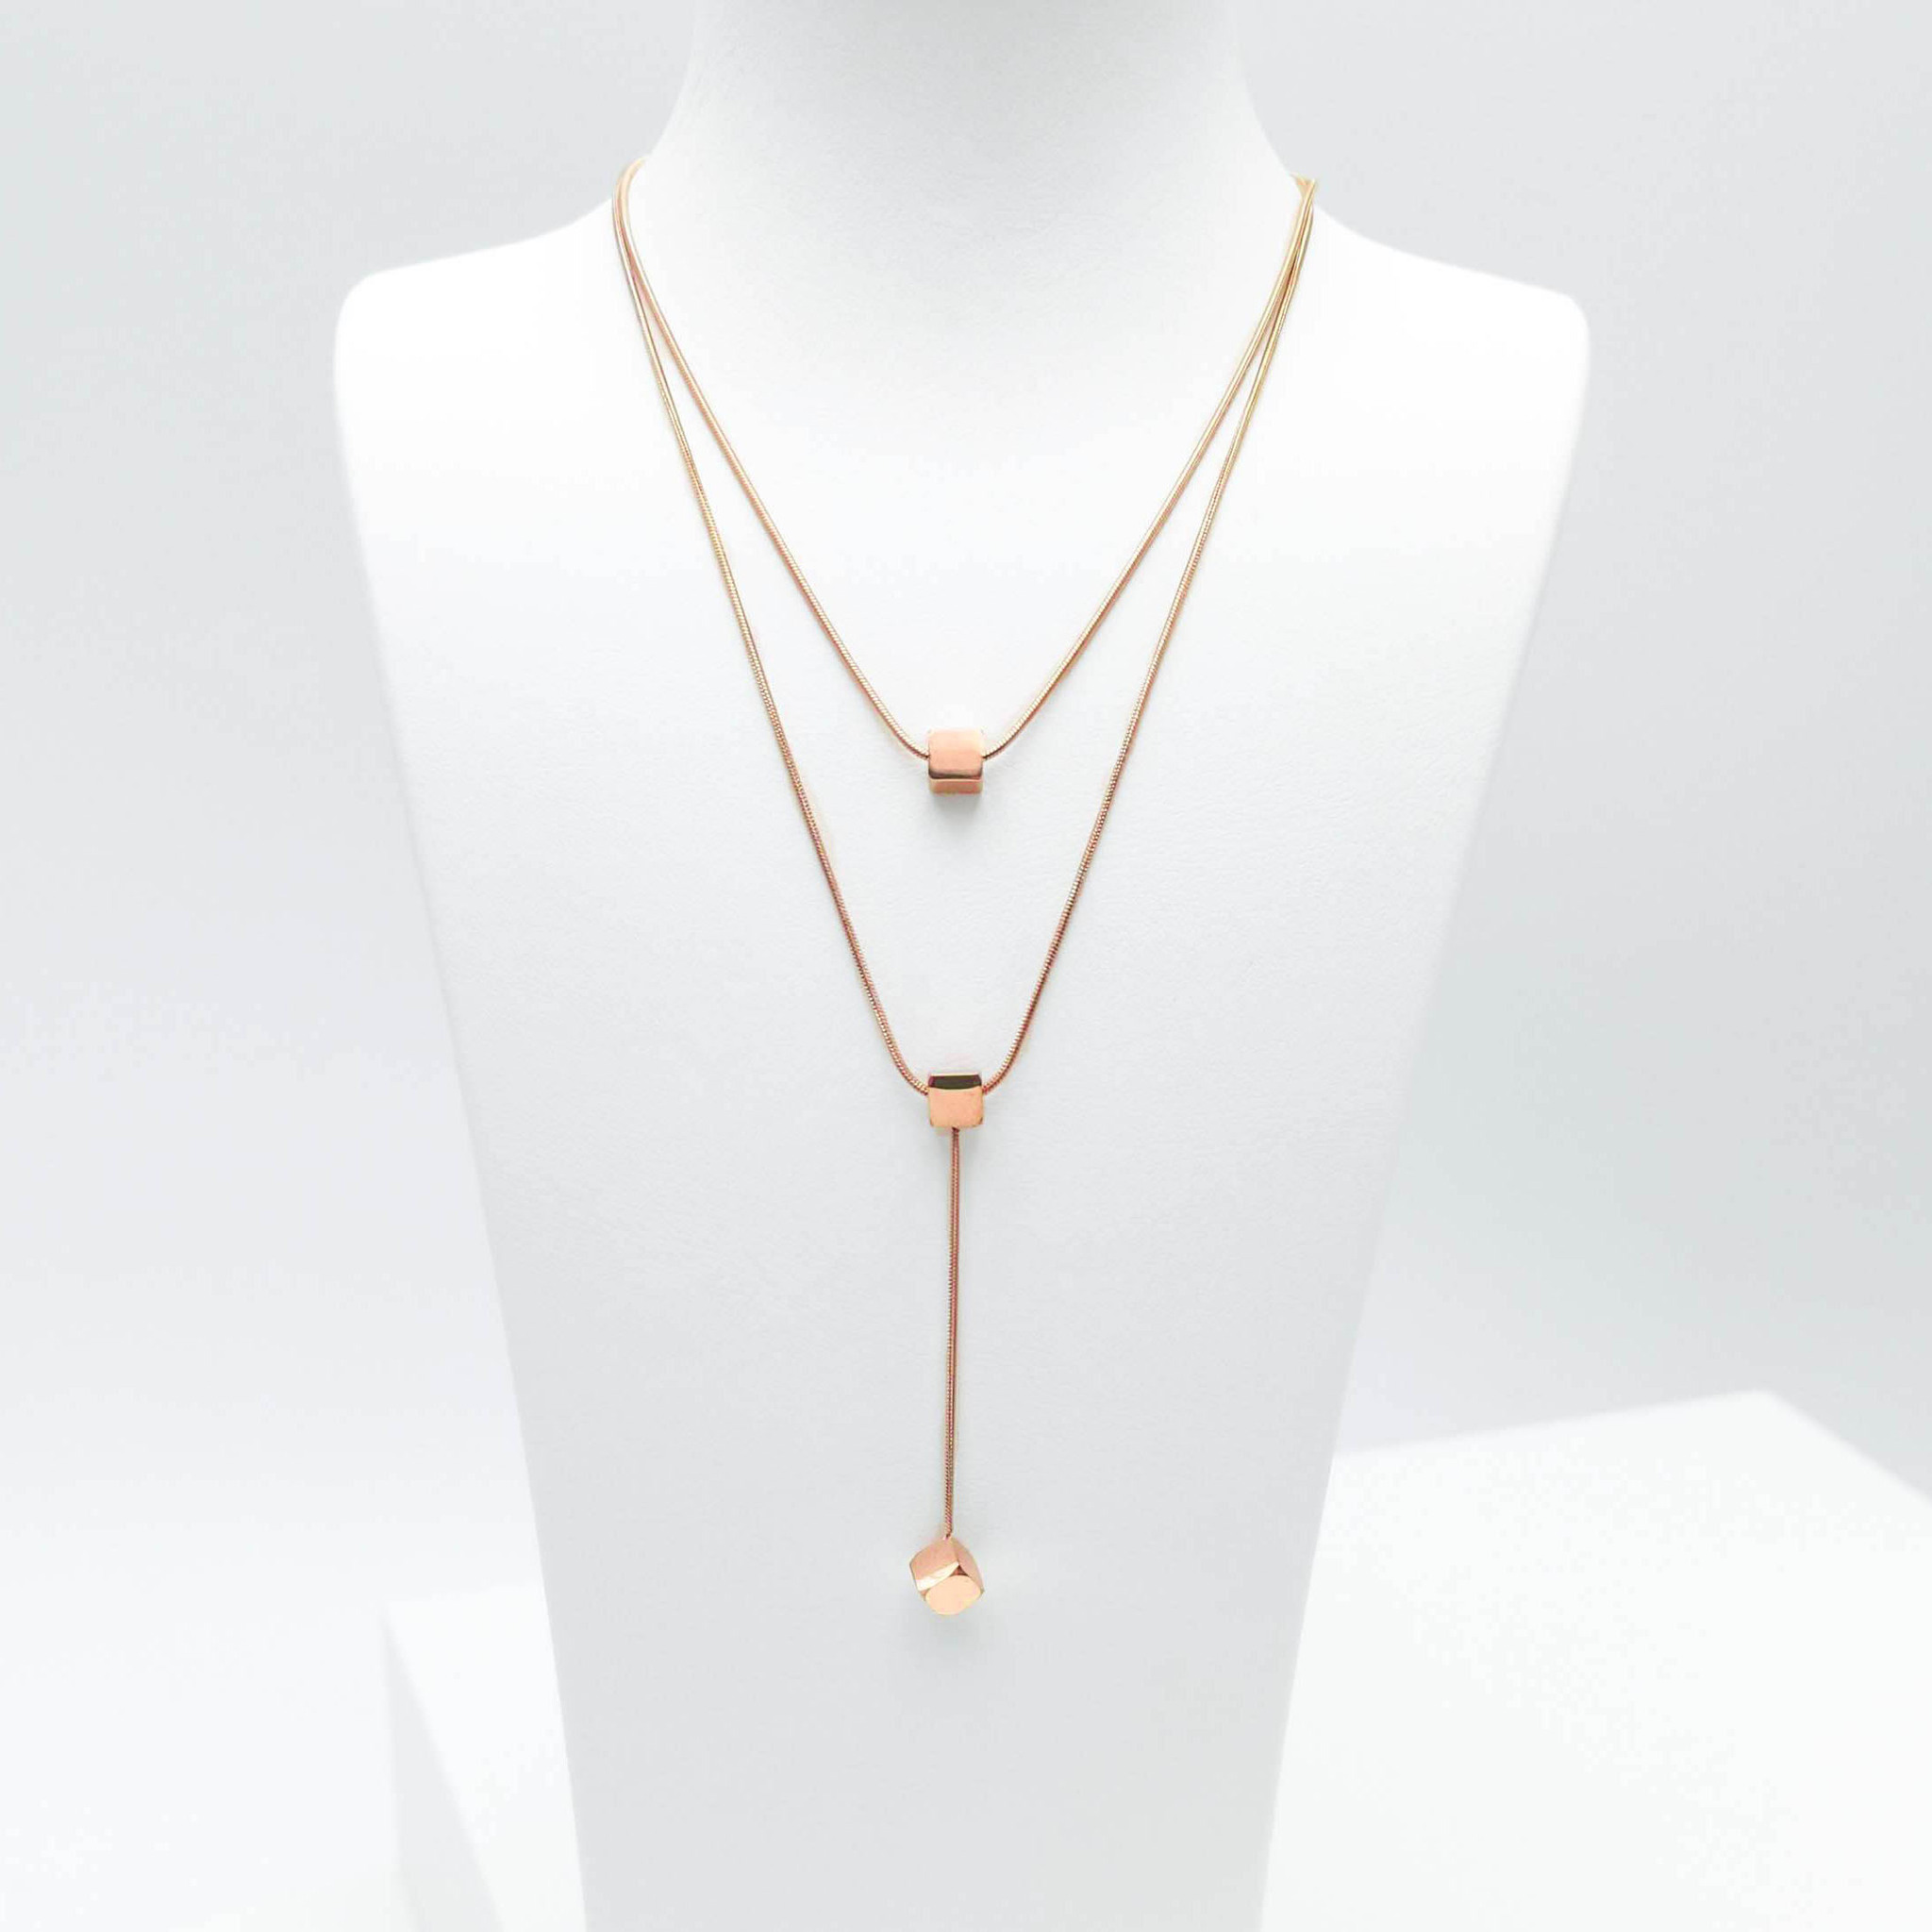 1- Charisma Lucky Orbits Halsband Modern and trendy Necklace and women jewelry and accessories from SWEVALI fashion Sweden